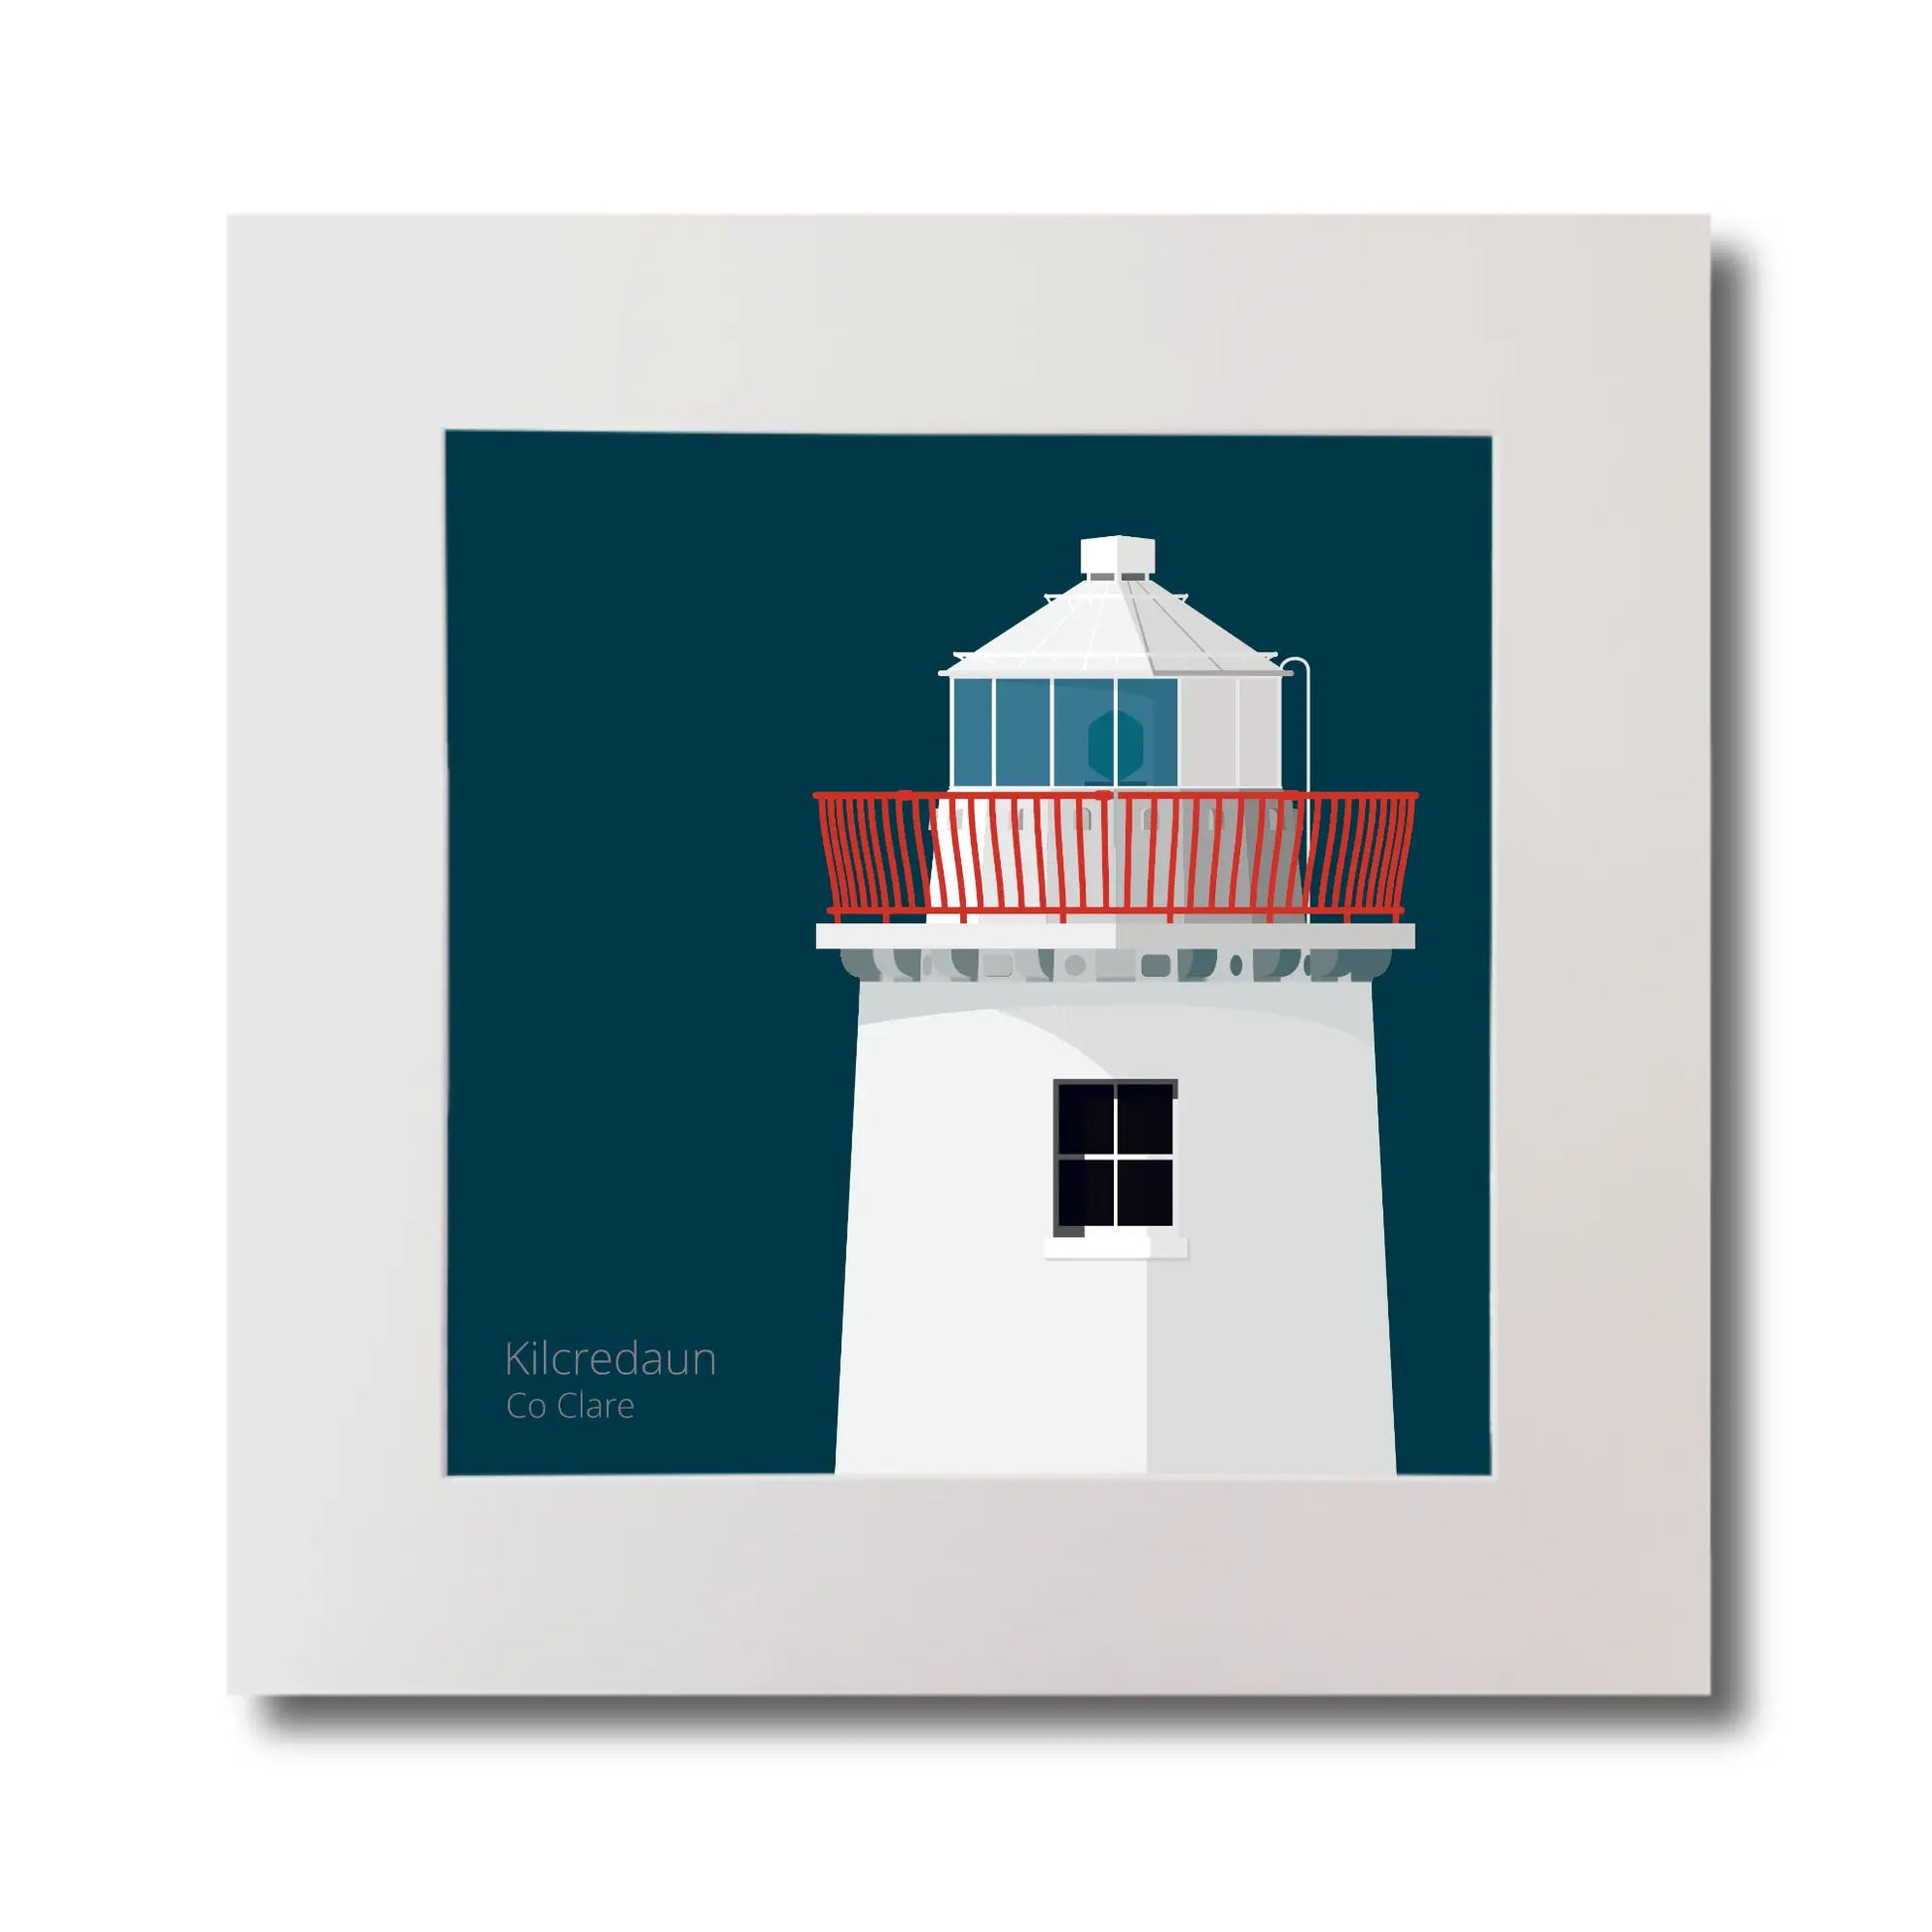 Illustration of Kilcredaun lighthouse on a midnight blue background, mounted and measuring 30x30cm.